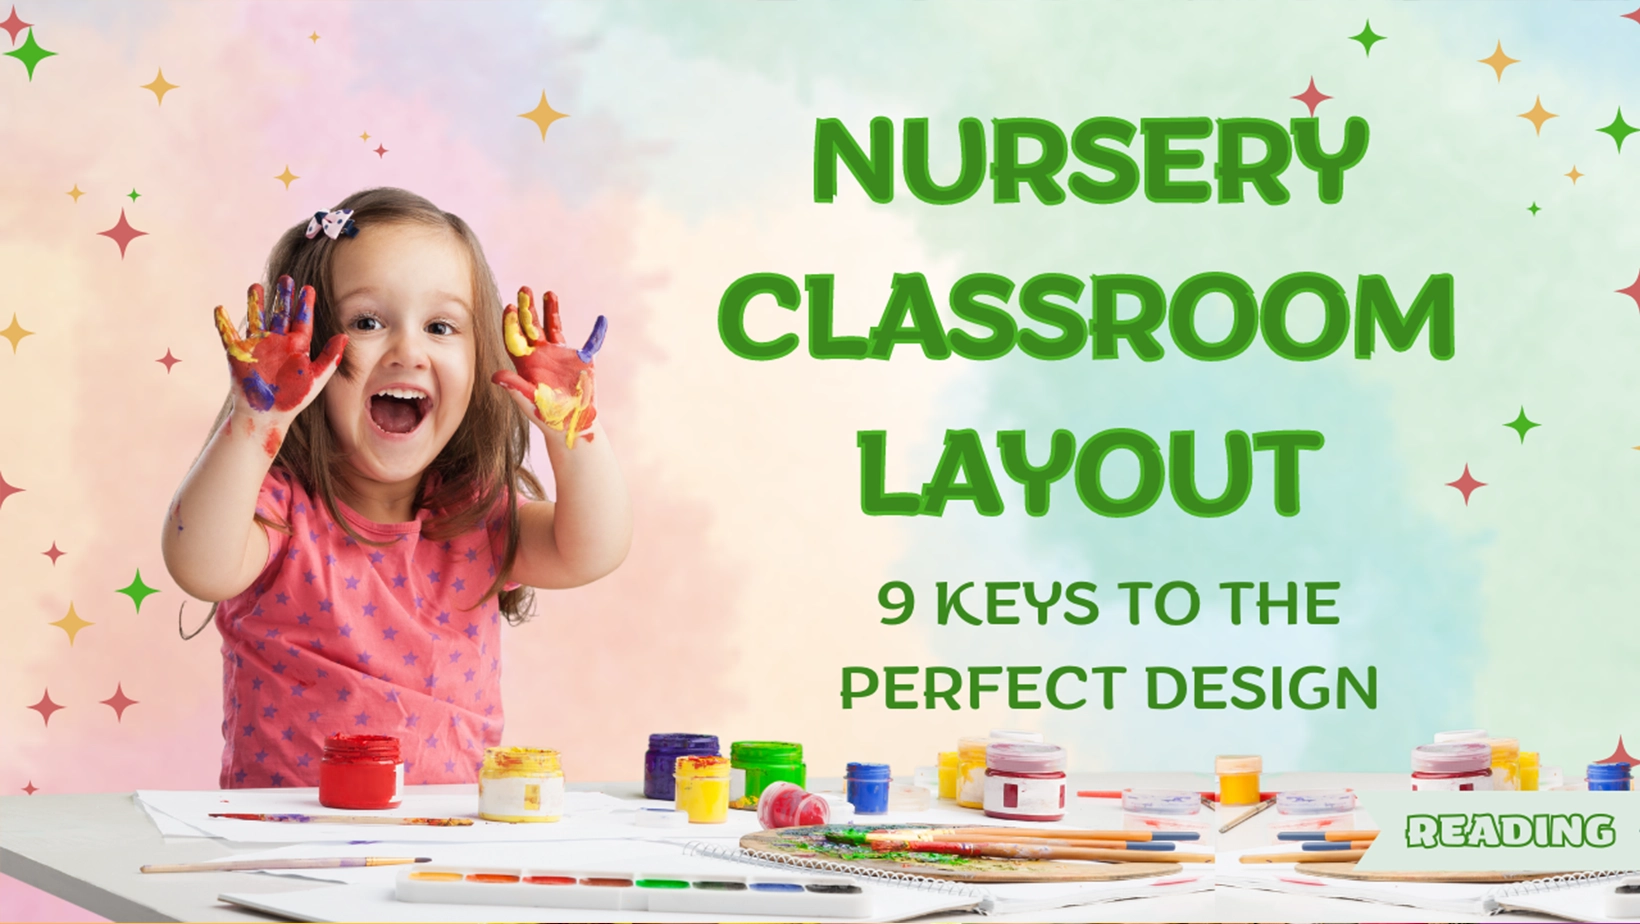 Nursery Classroom Layout Principles-9 Keys to the Perfect Design